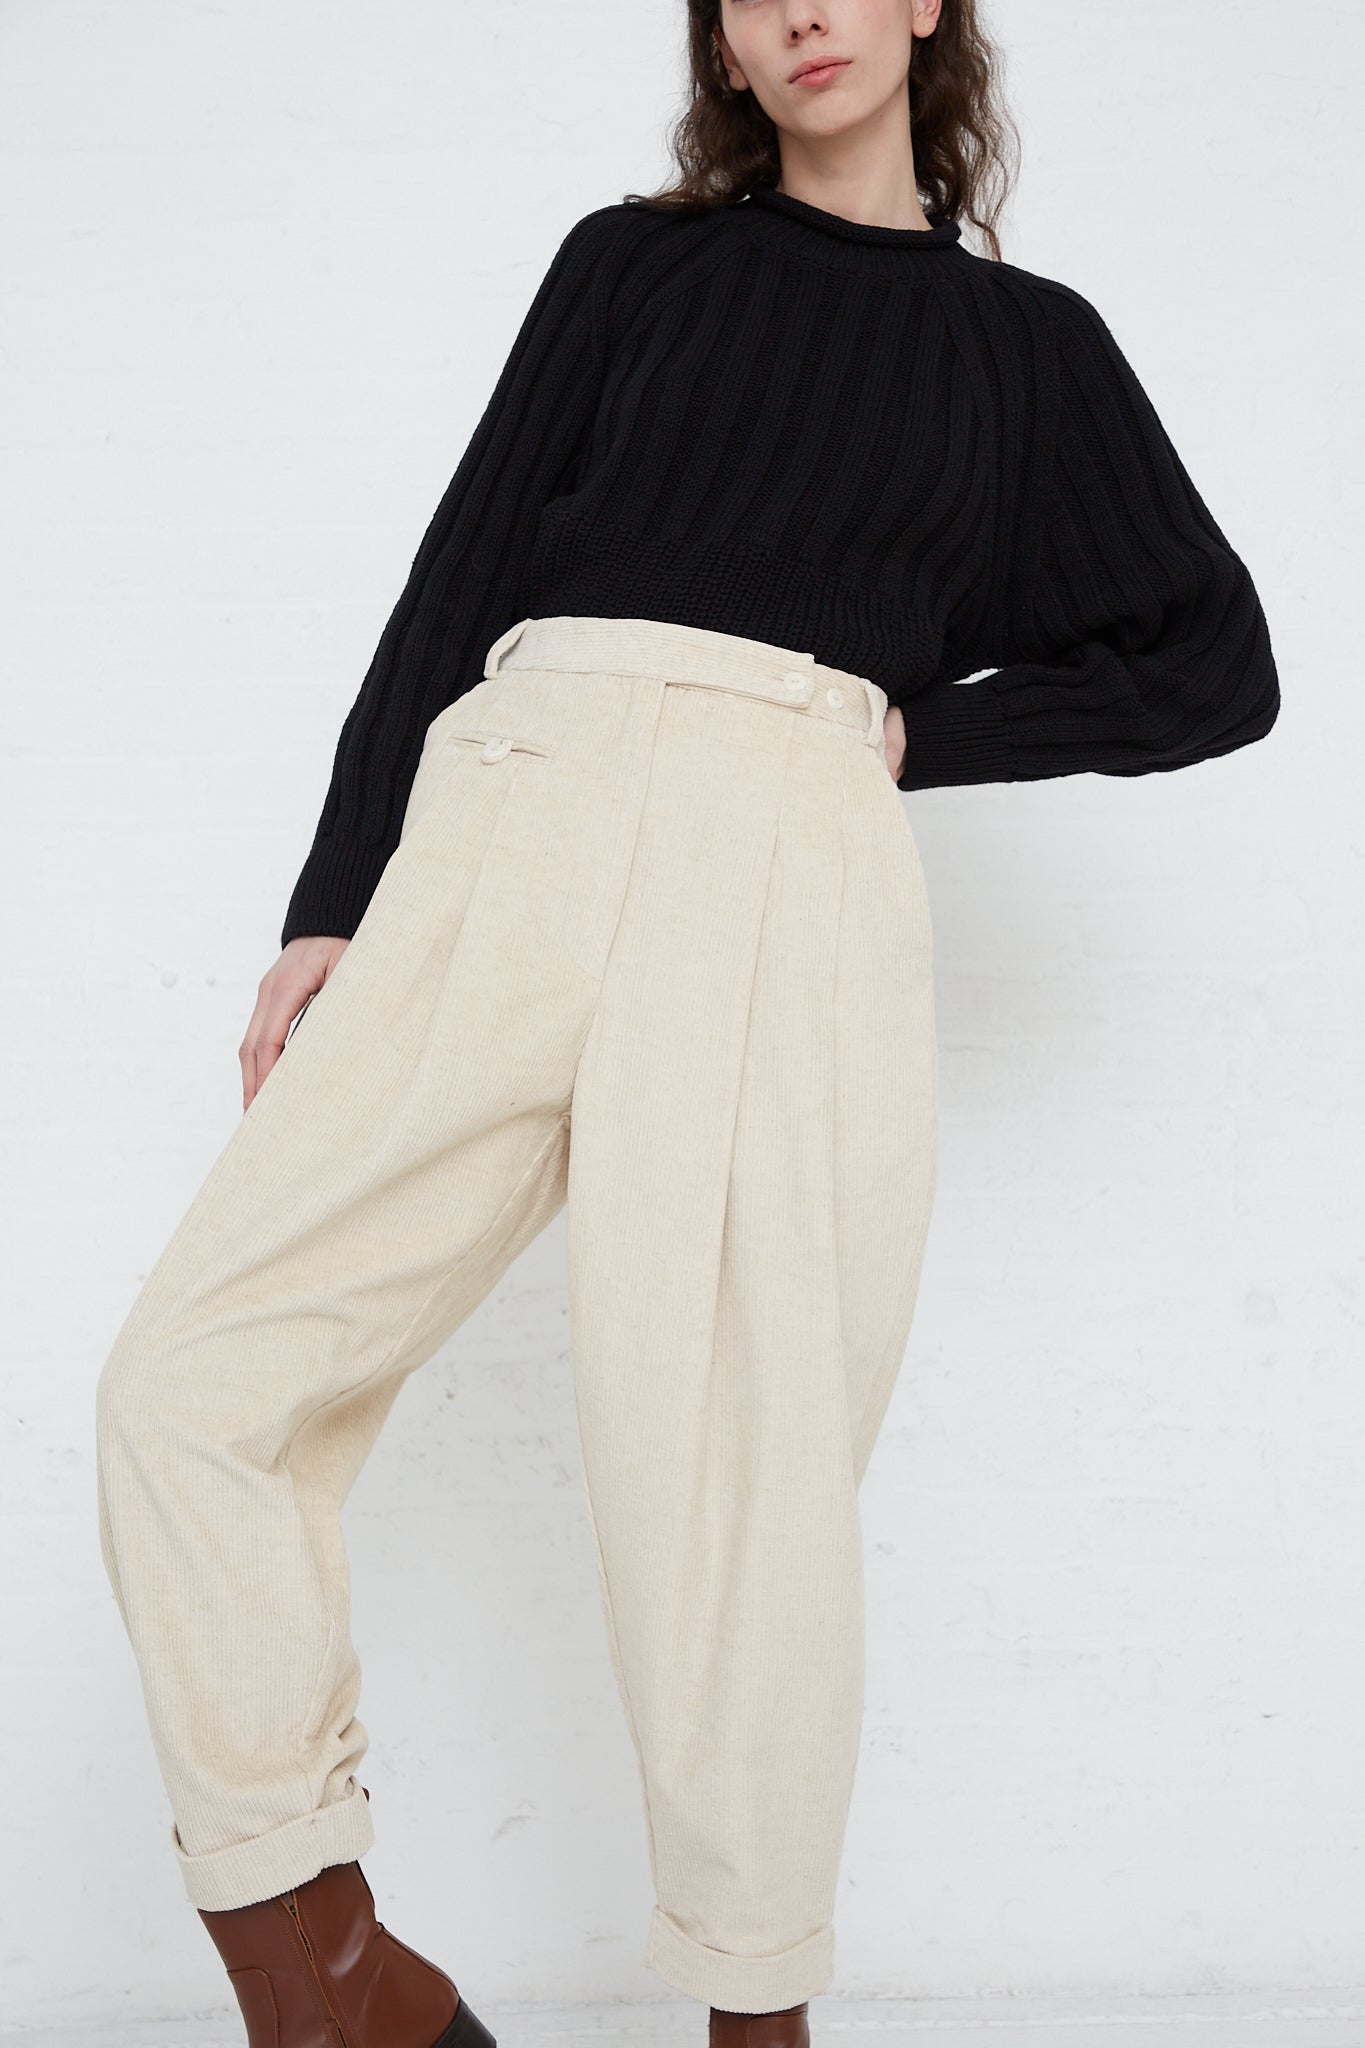 The model is wearing a black Cordera sweater and Corduroy Carrot Pants in Off White made in Spain.